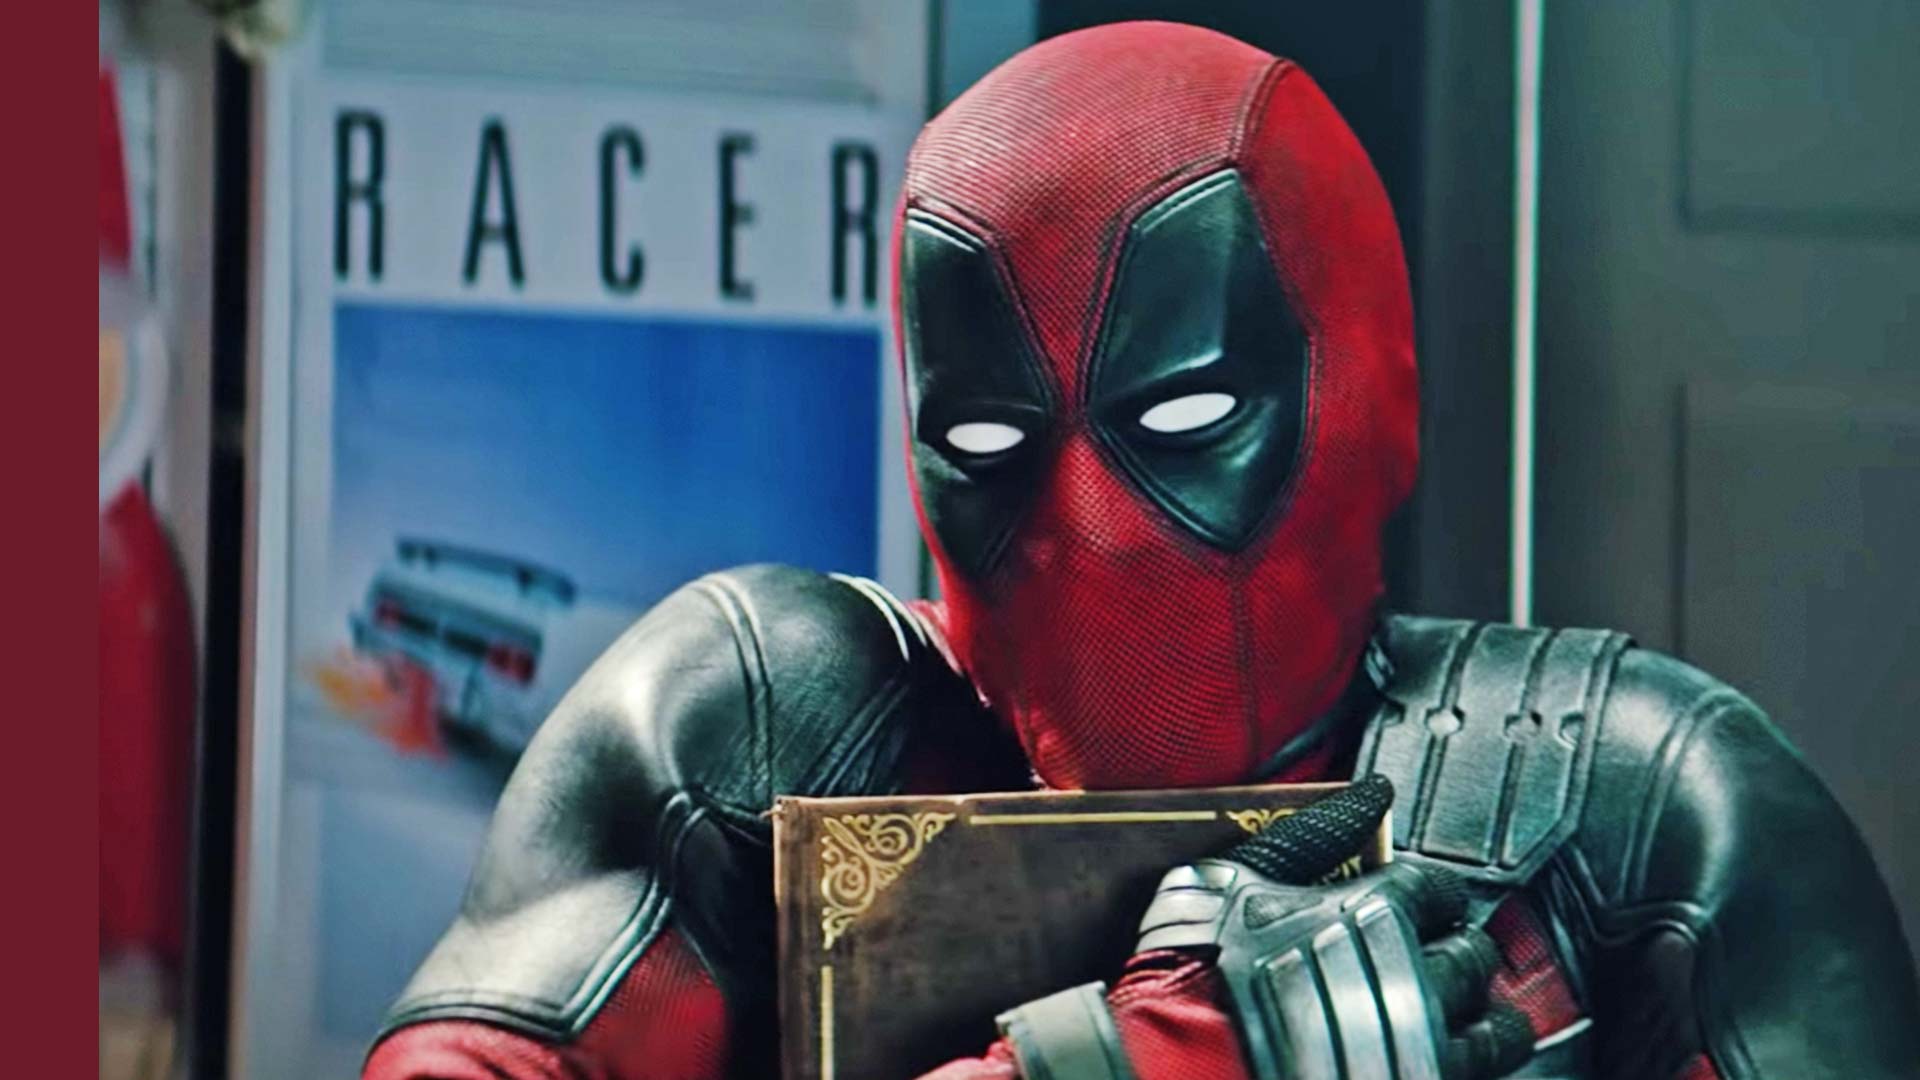 Deadpool 2 for the family? Once Upon a Deadpool is making it possible!